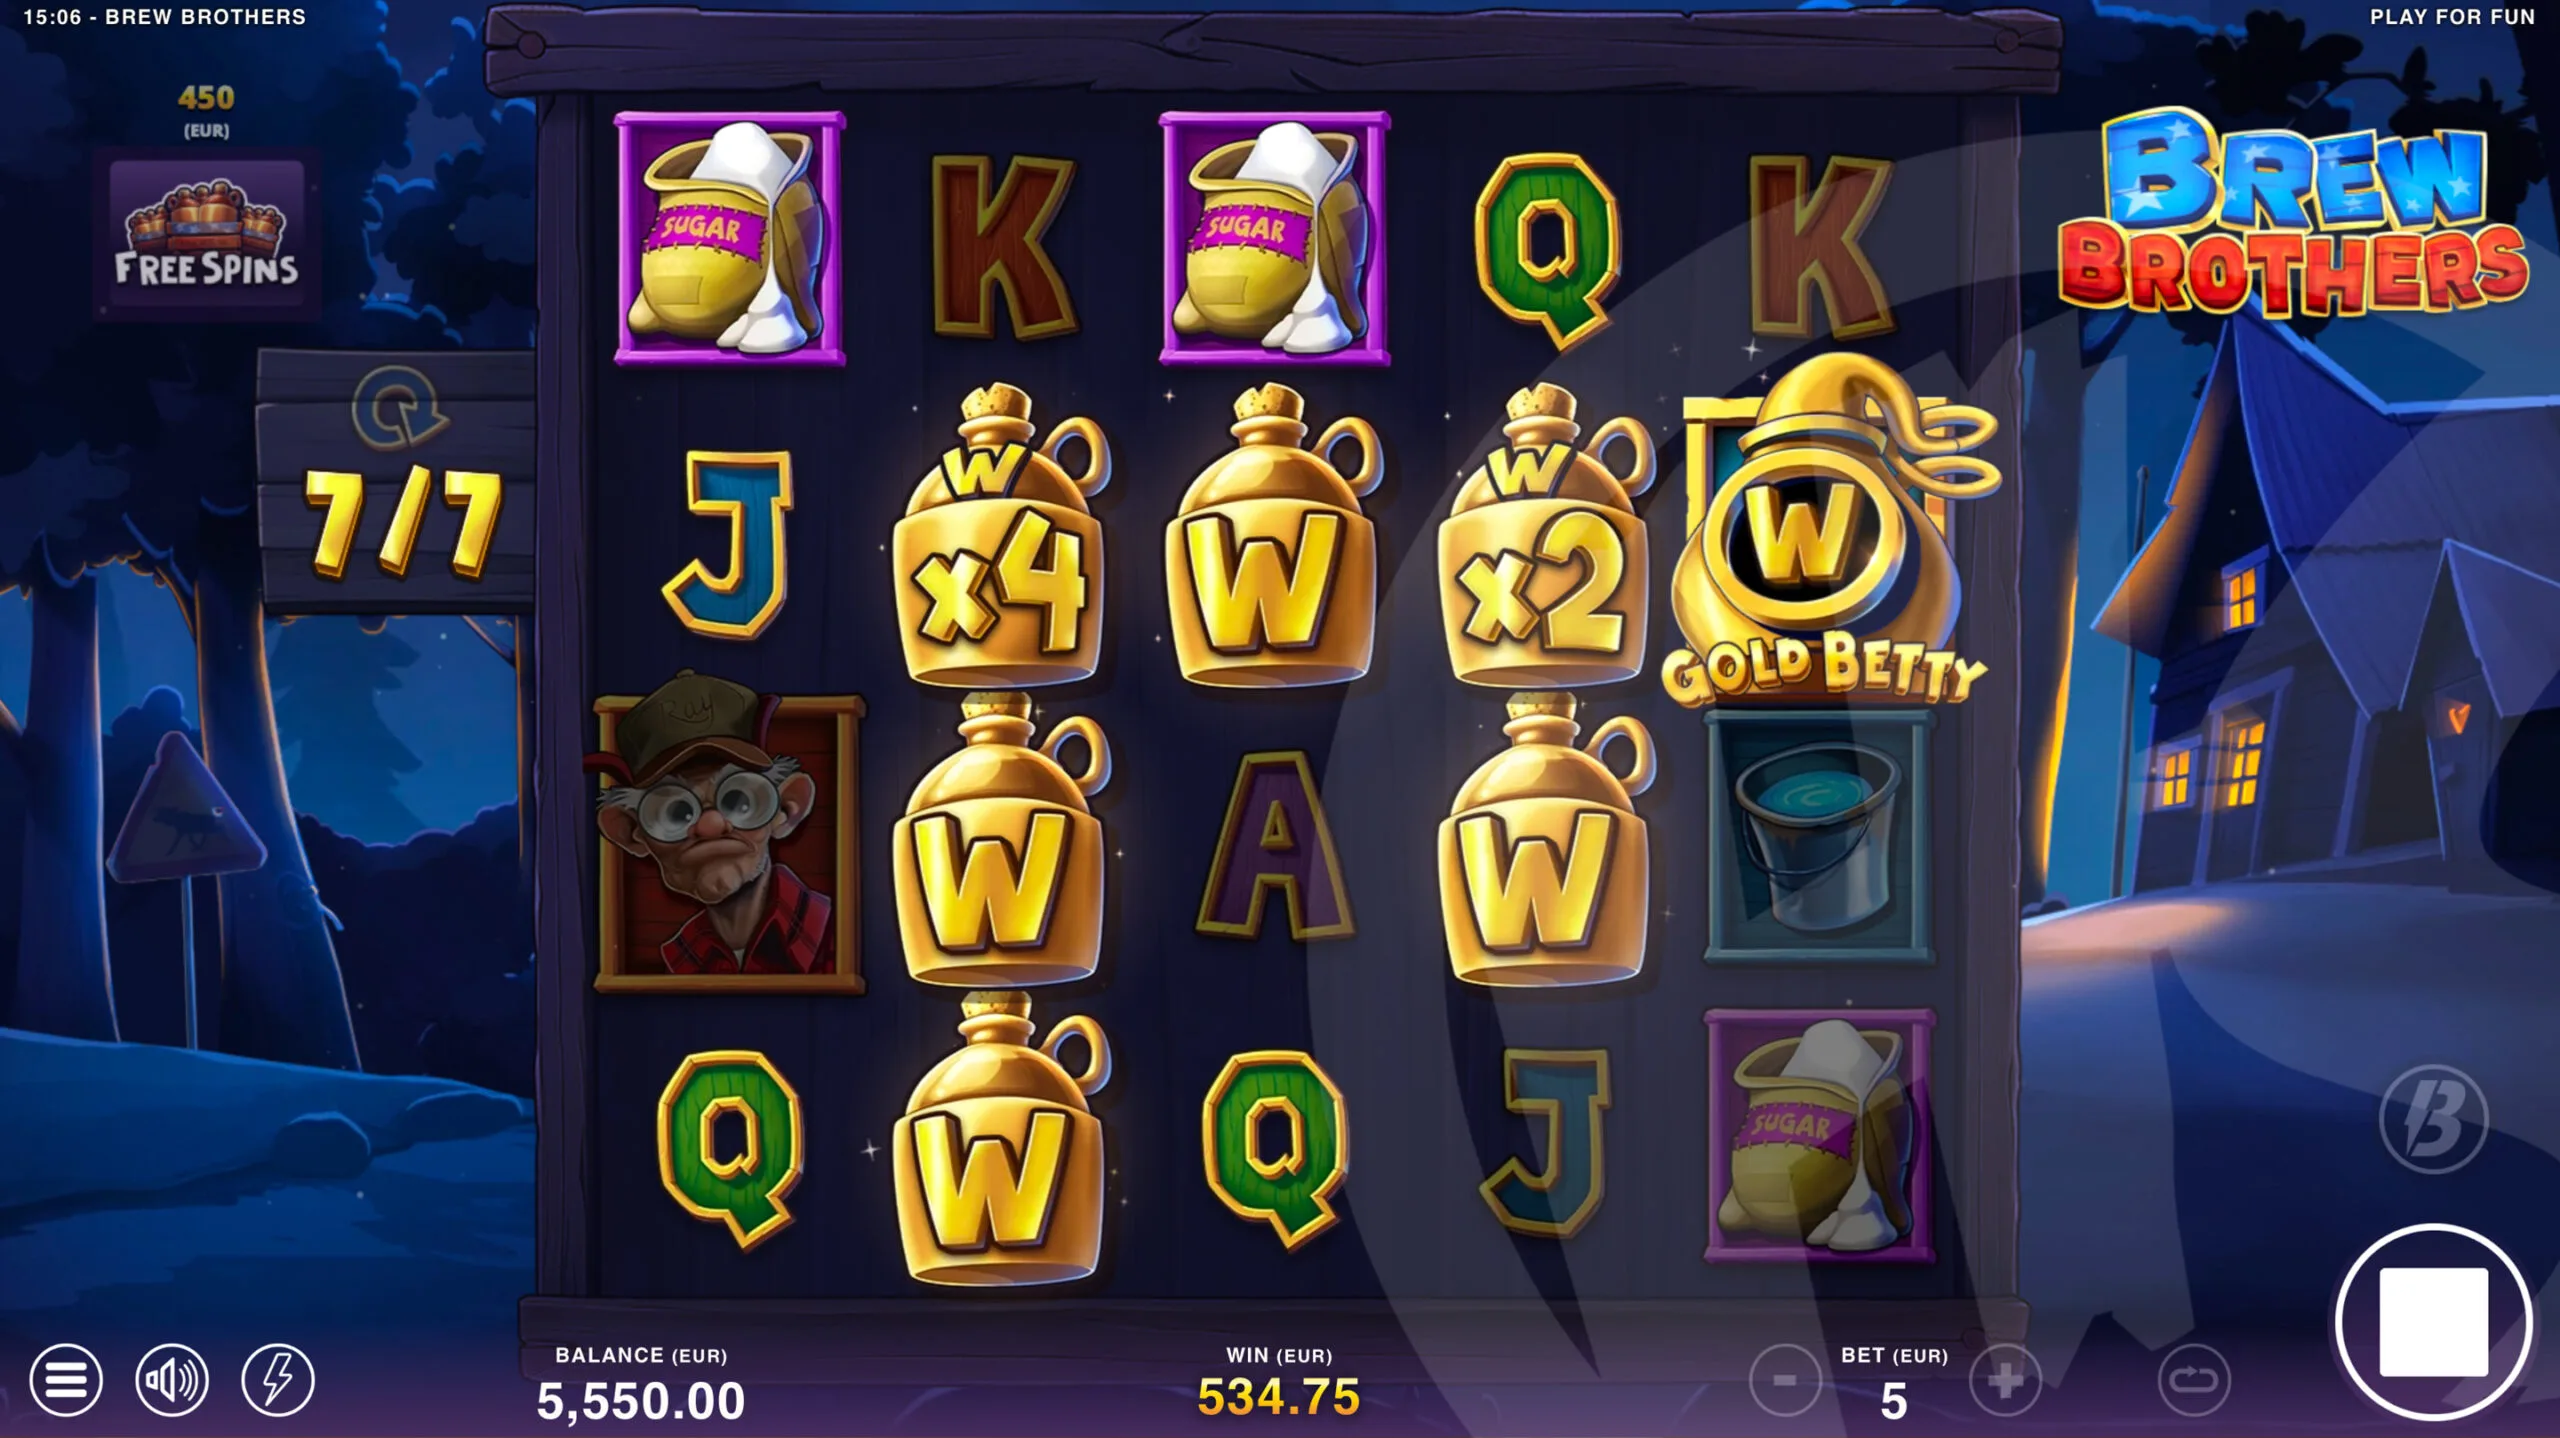 If a Gold Betty Symbol Lands During the Free Spins Bonus it will Stick for the Duration of Spins